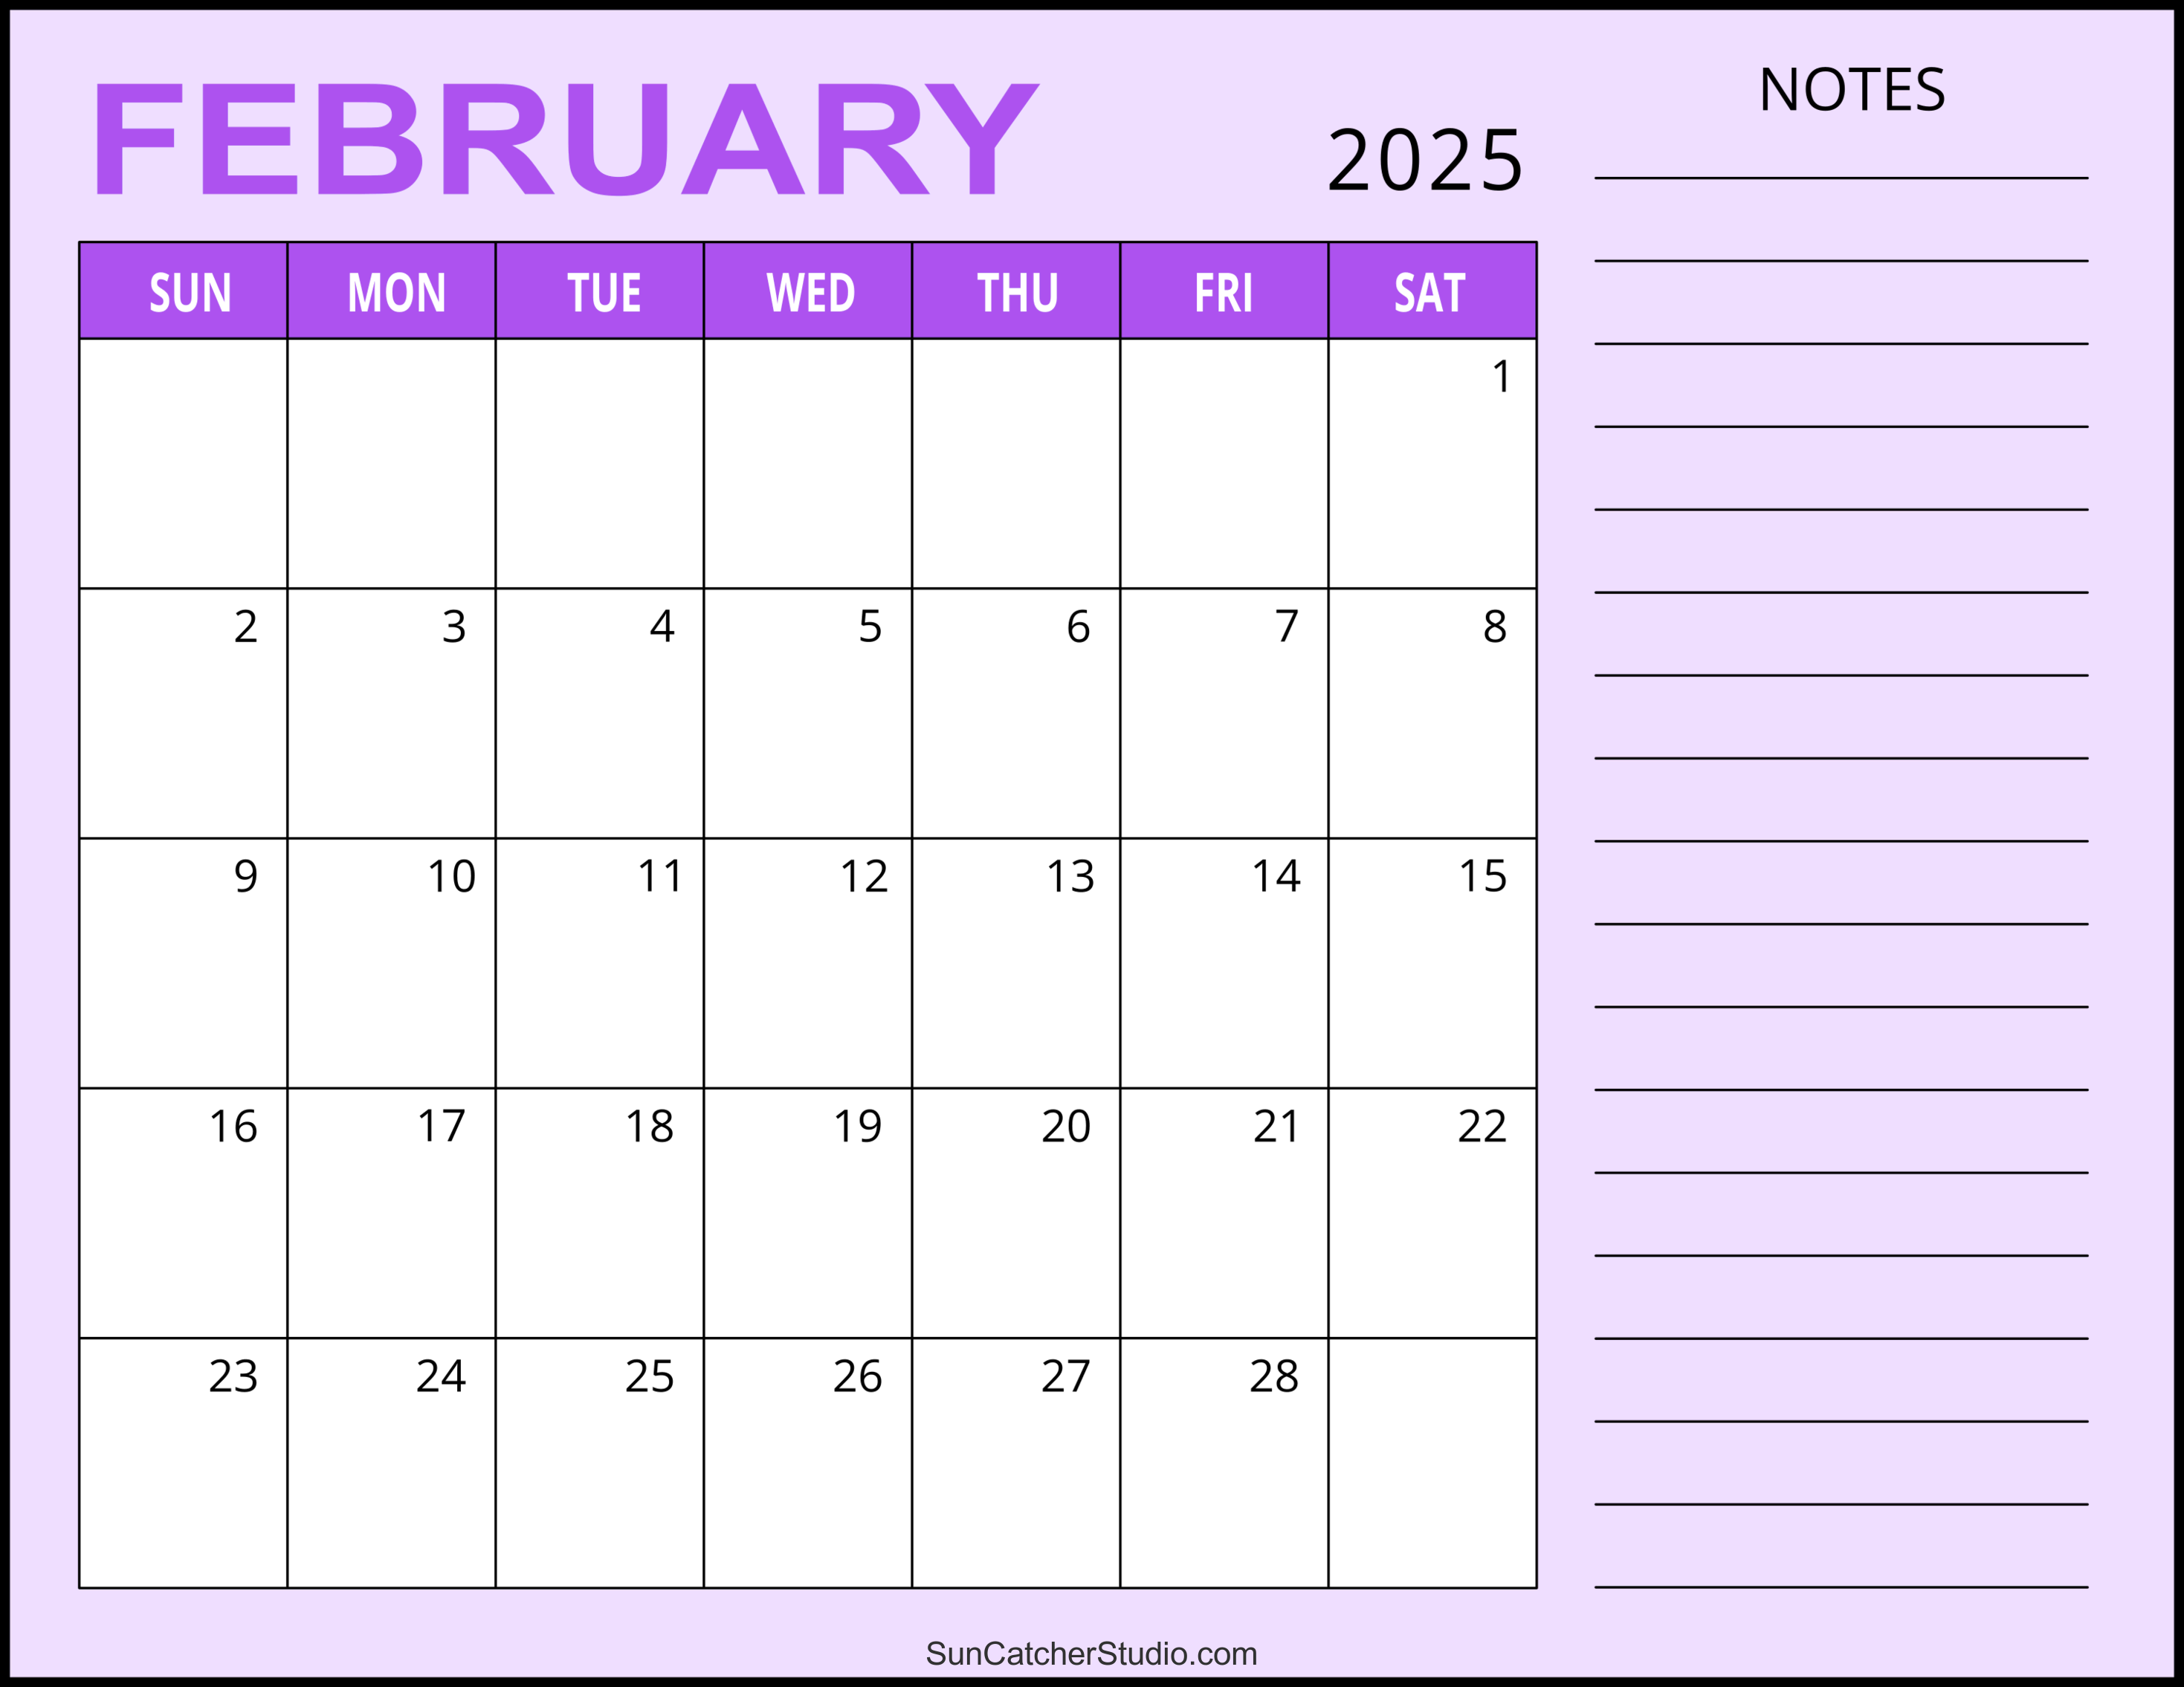 february-2025-calendar-free-printable-diy-projects-patterns